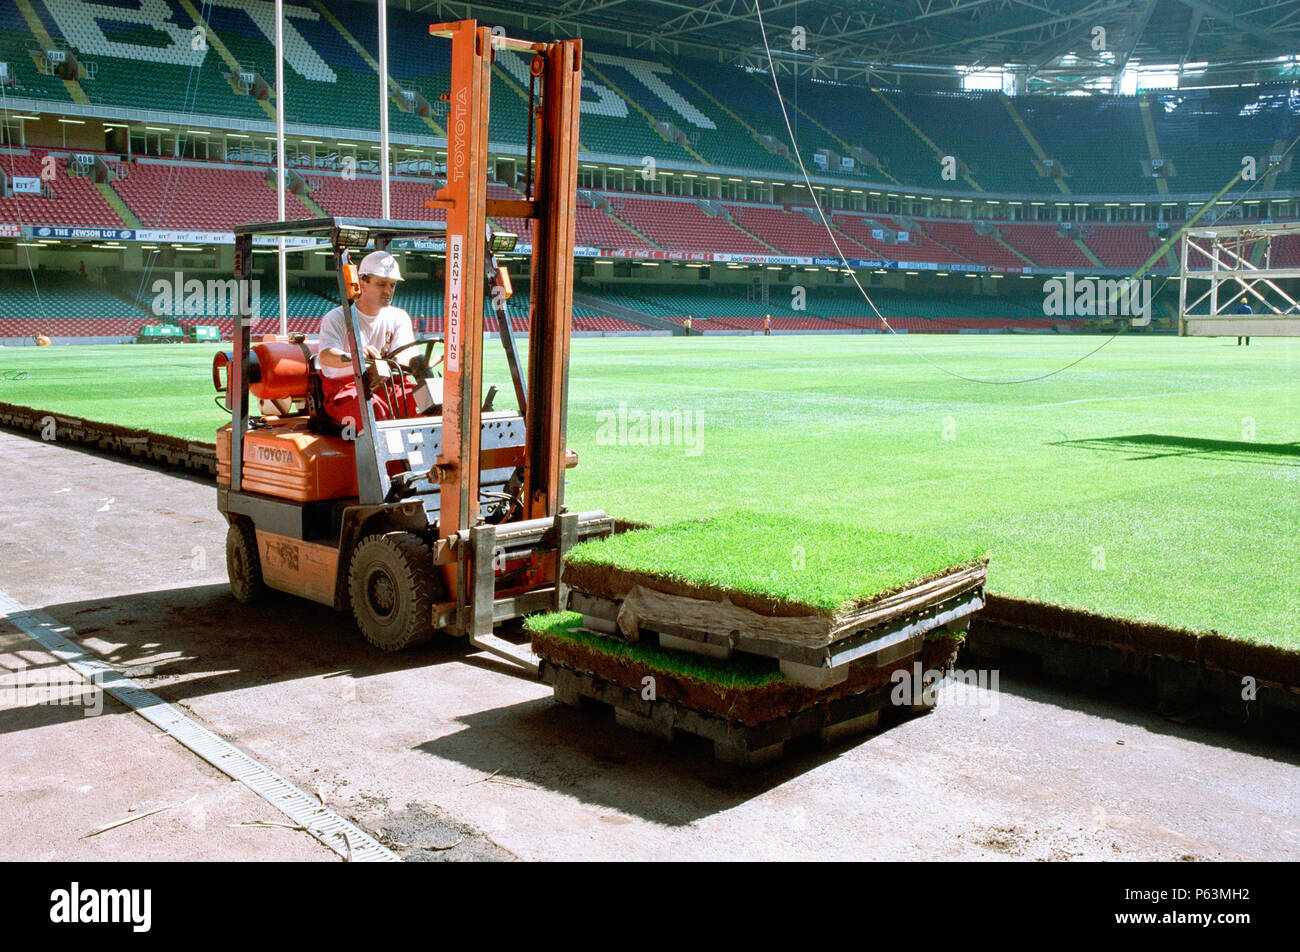 Cardiff Millennium Stadium. The turf for the pitch is on pallet units allowing quick removal for maintenance or for converting the stadium for arena e Stock Photo